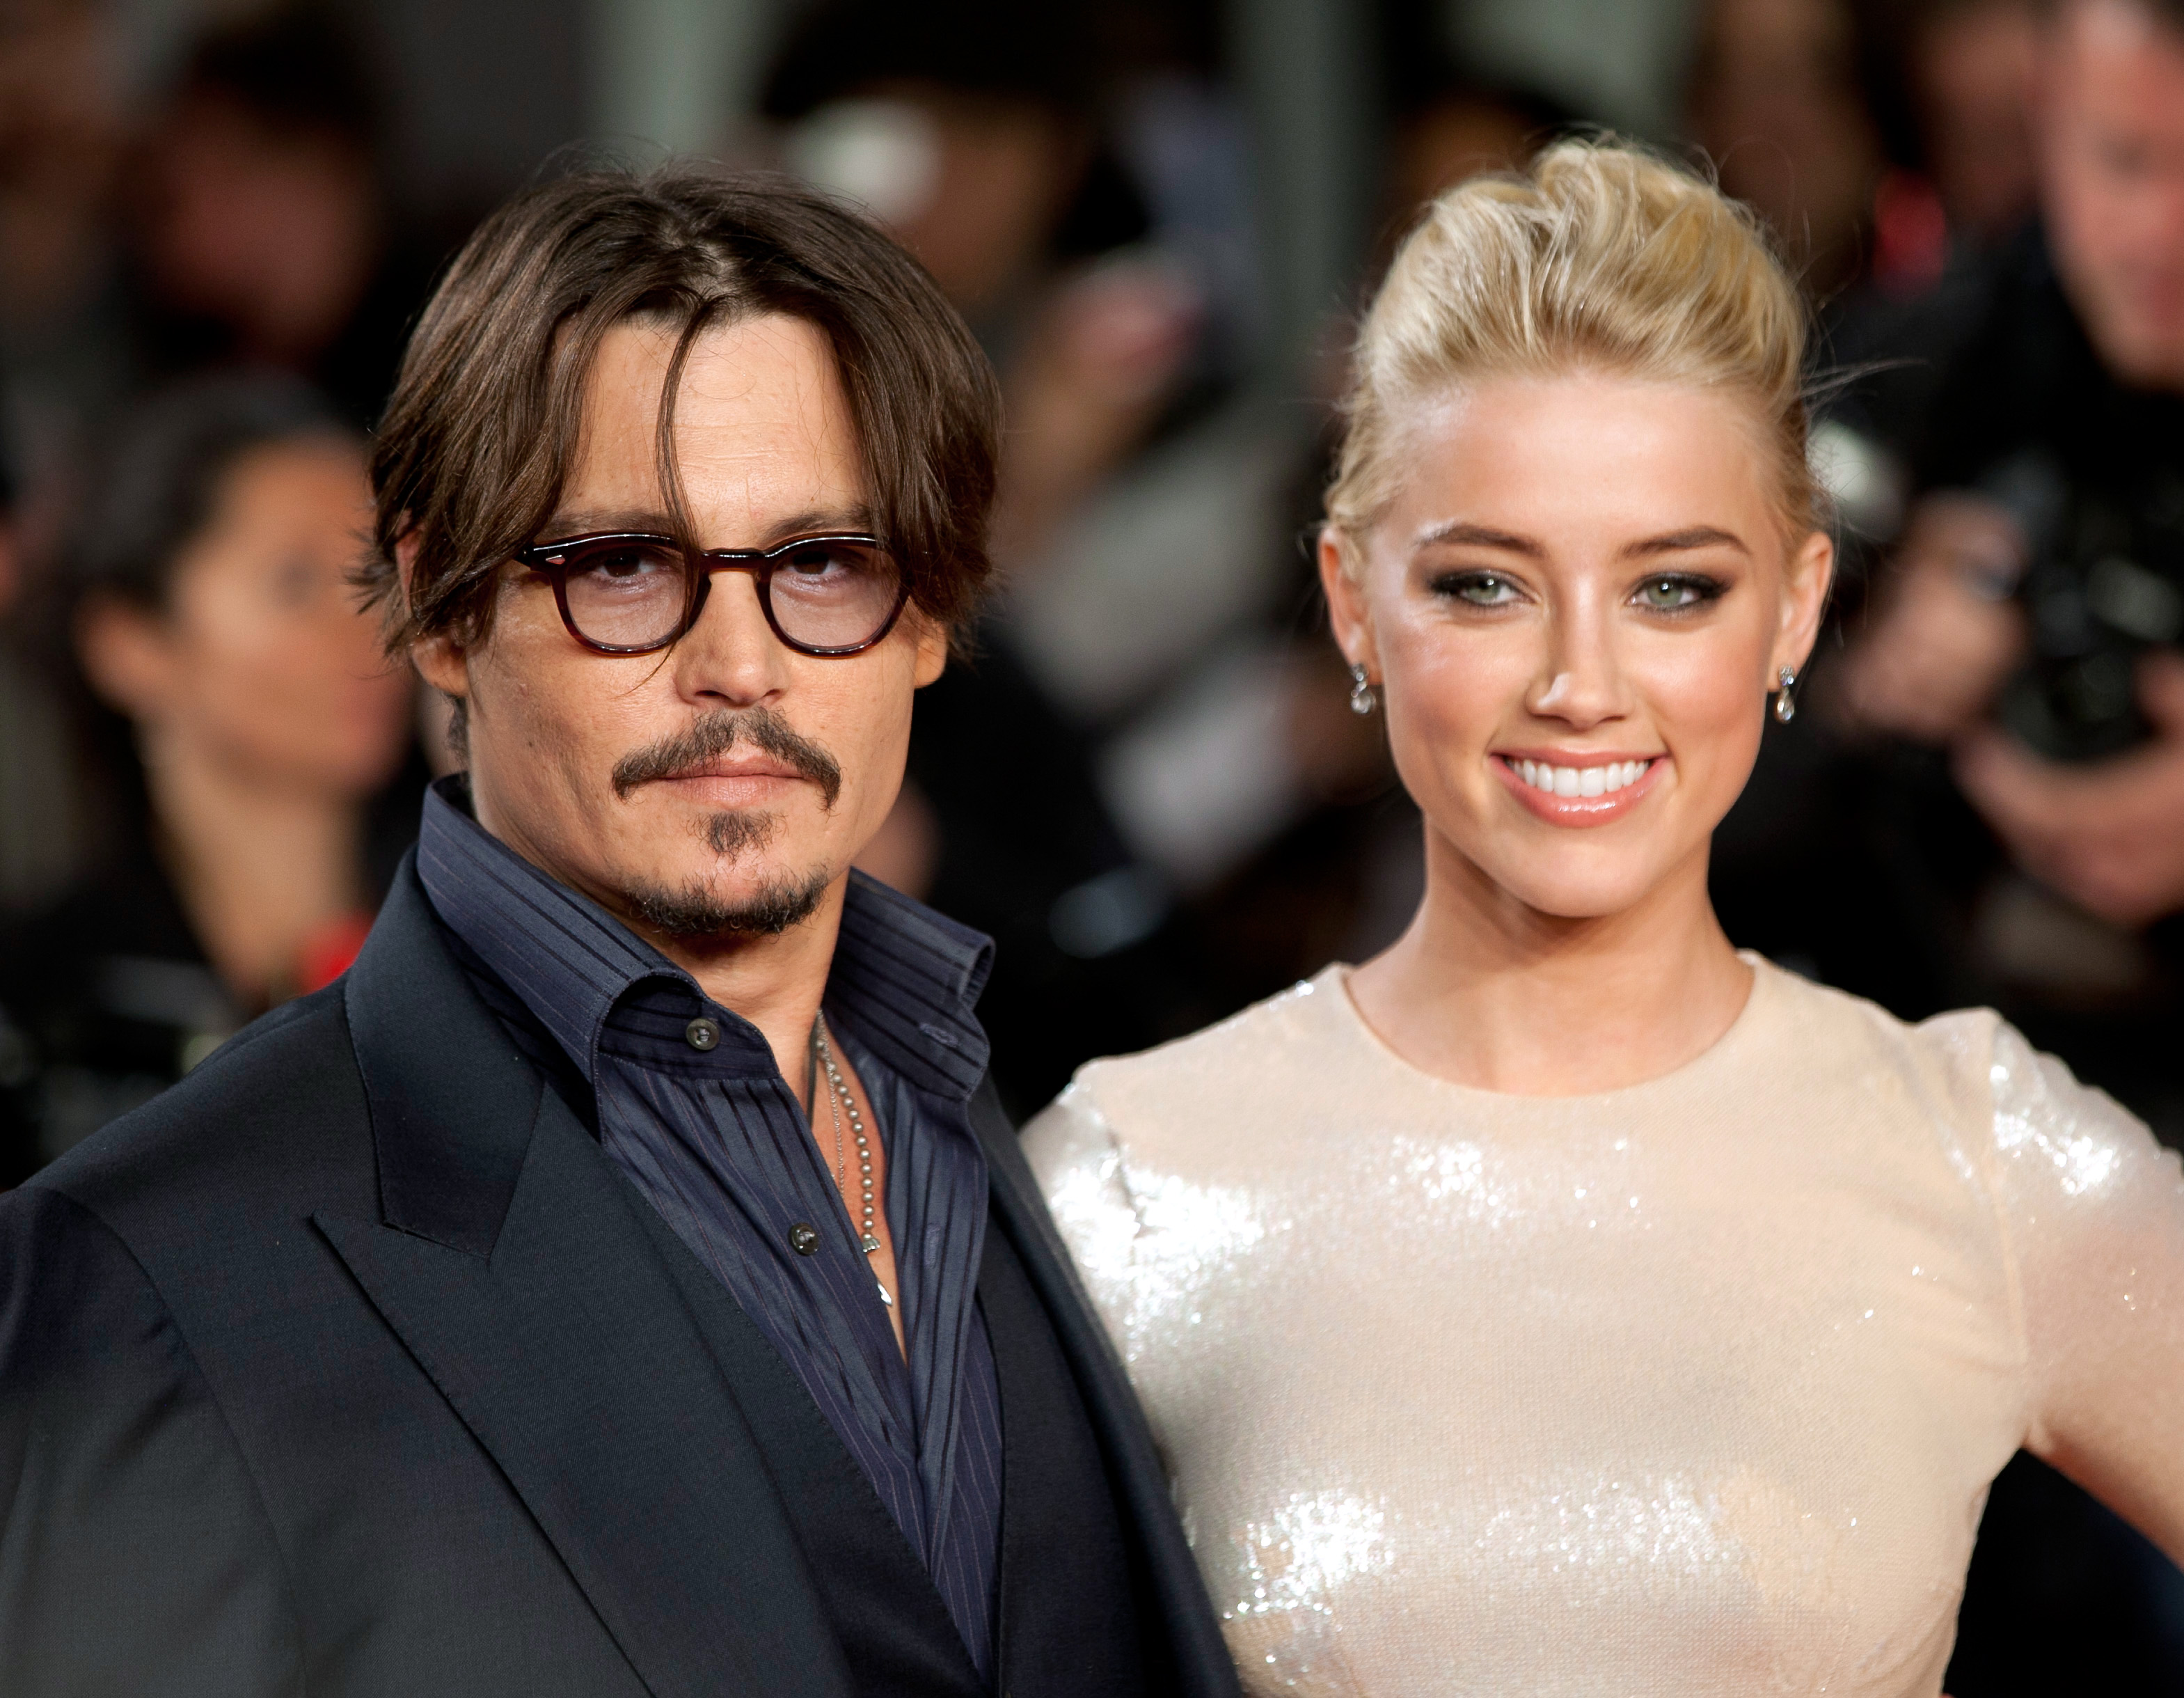 Johnny Depp and Amber Heard, who lived in Los Angeles penthouse when they were married, pose together on the carpet at the European premiere of 'The Rum Diary'